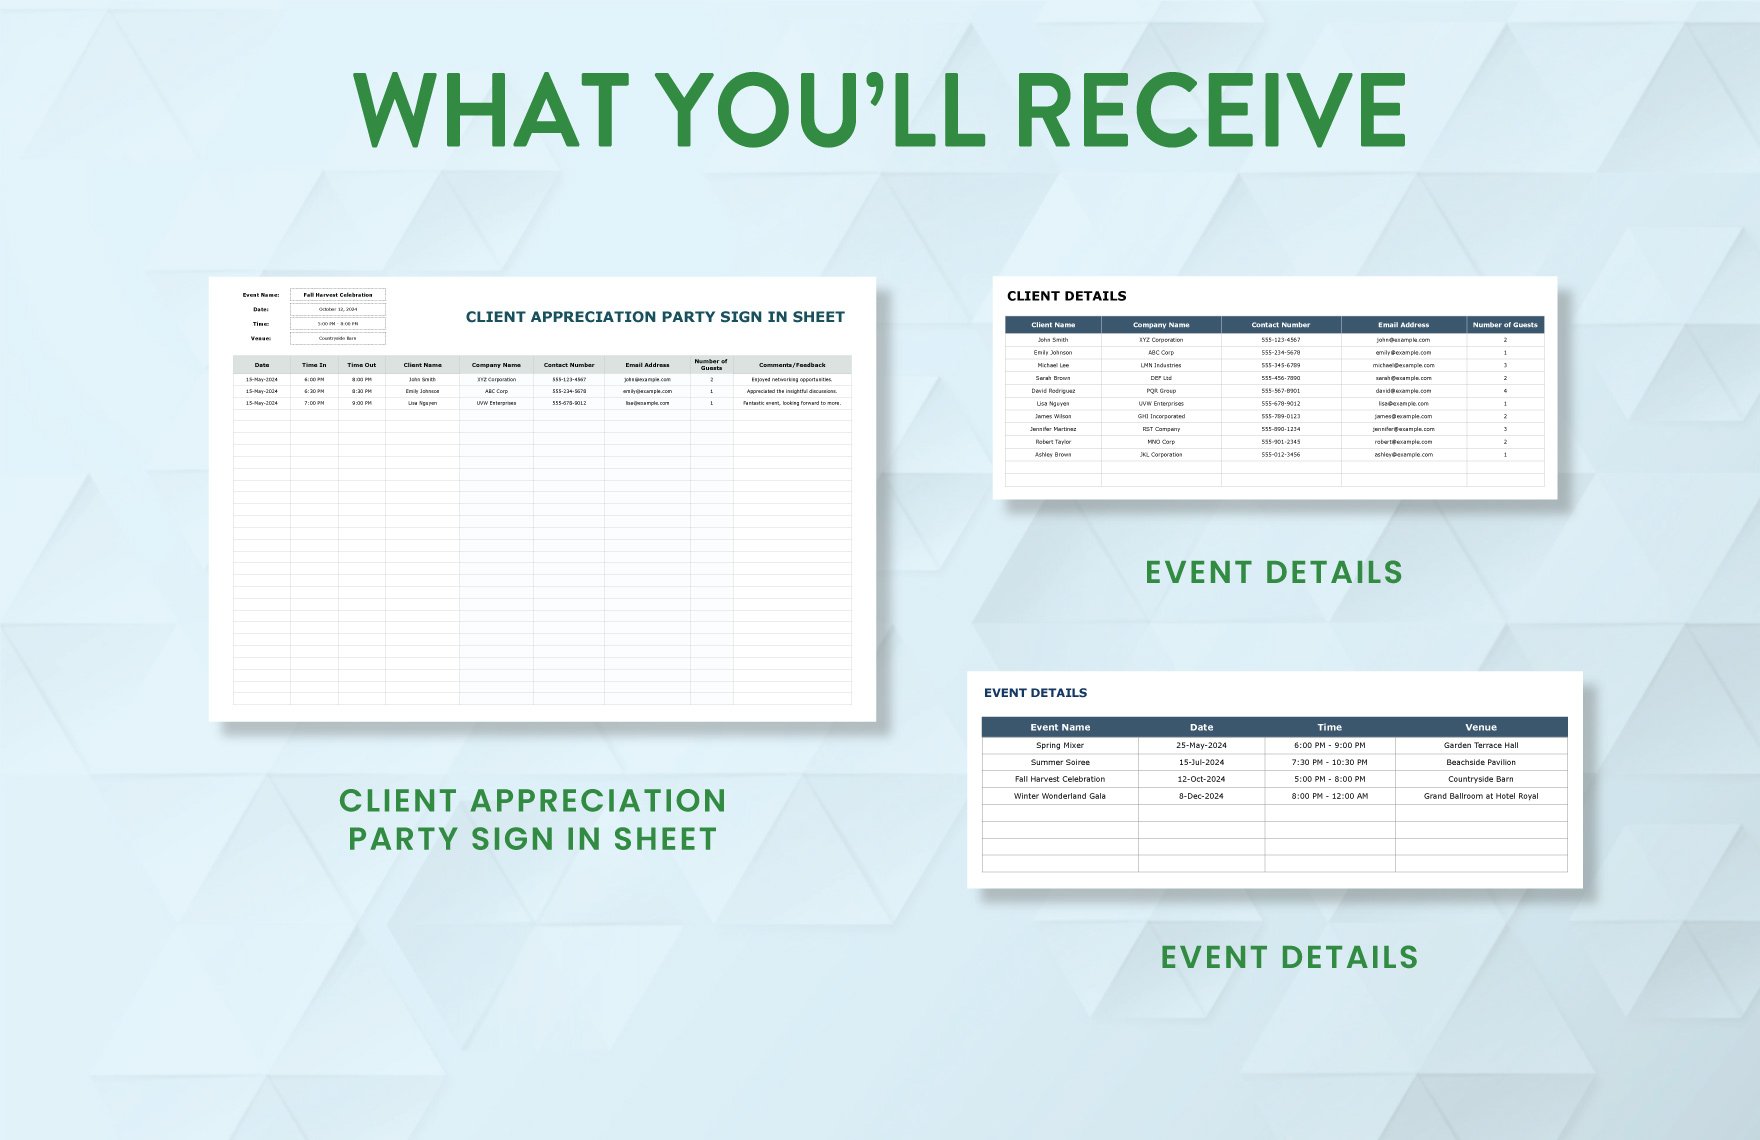 Client Appreciation Party Sign in Sheet Template